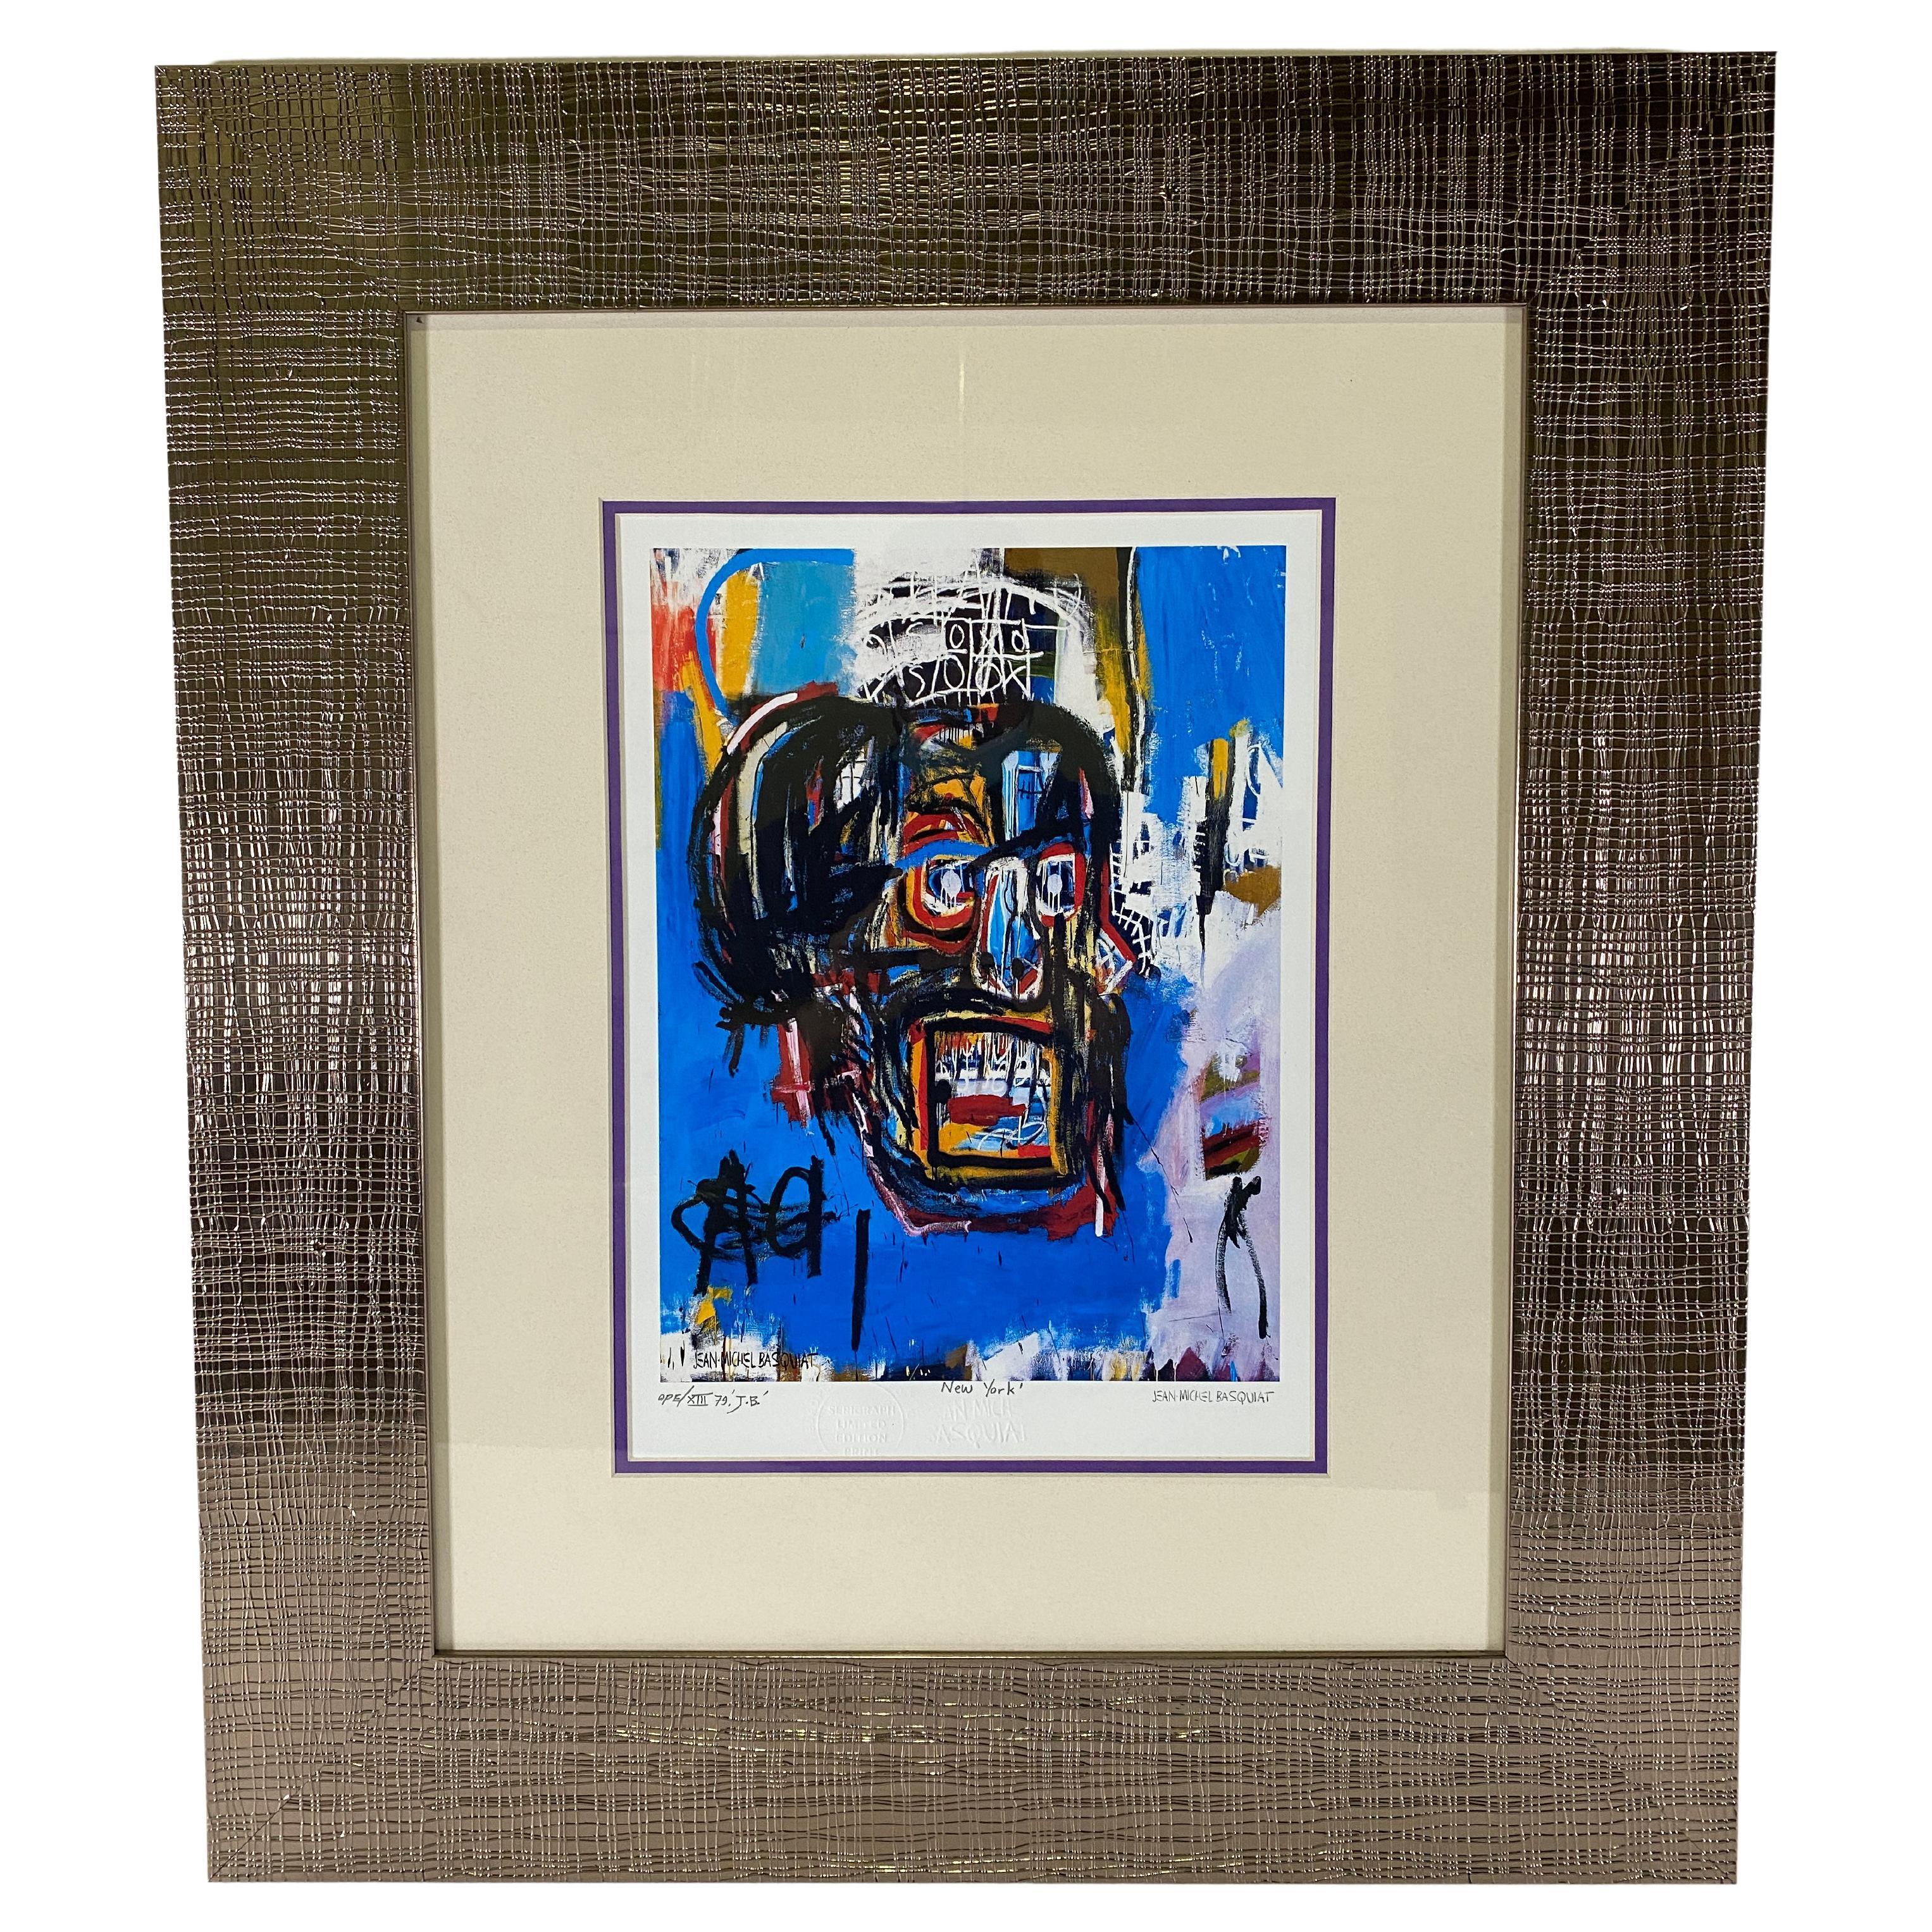 American Abstract Expressionist Lithograph, "Untitled 1982"Jean Michel Basquiat